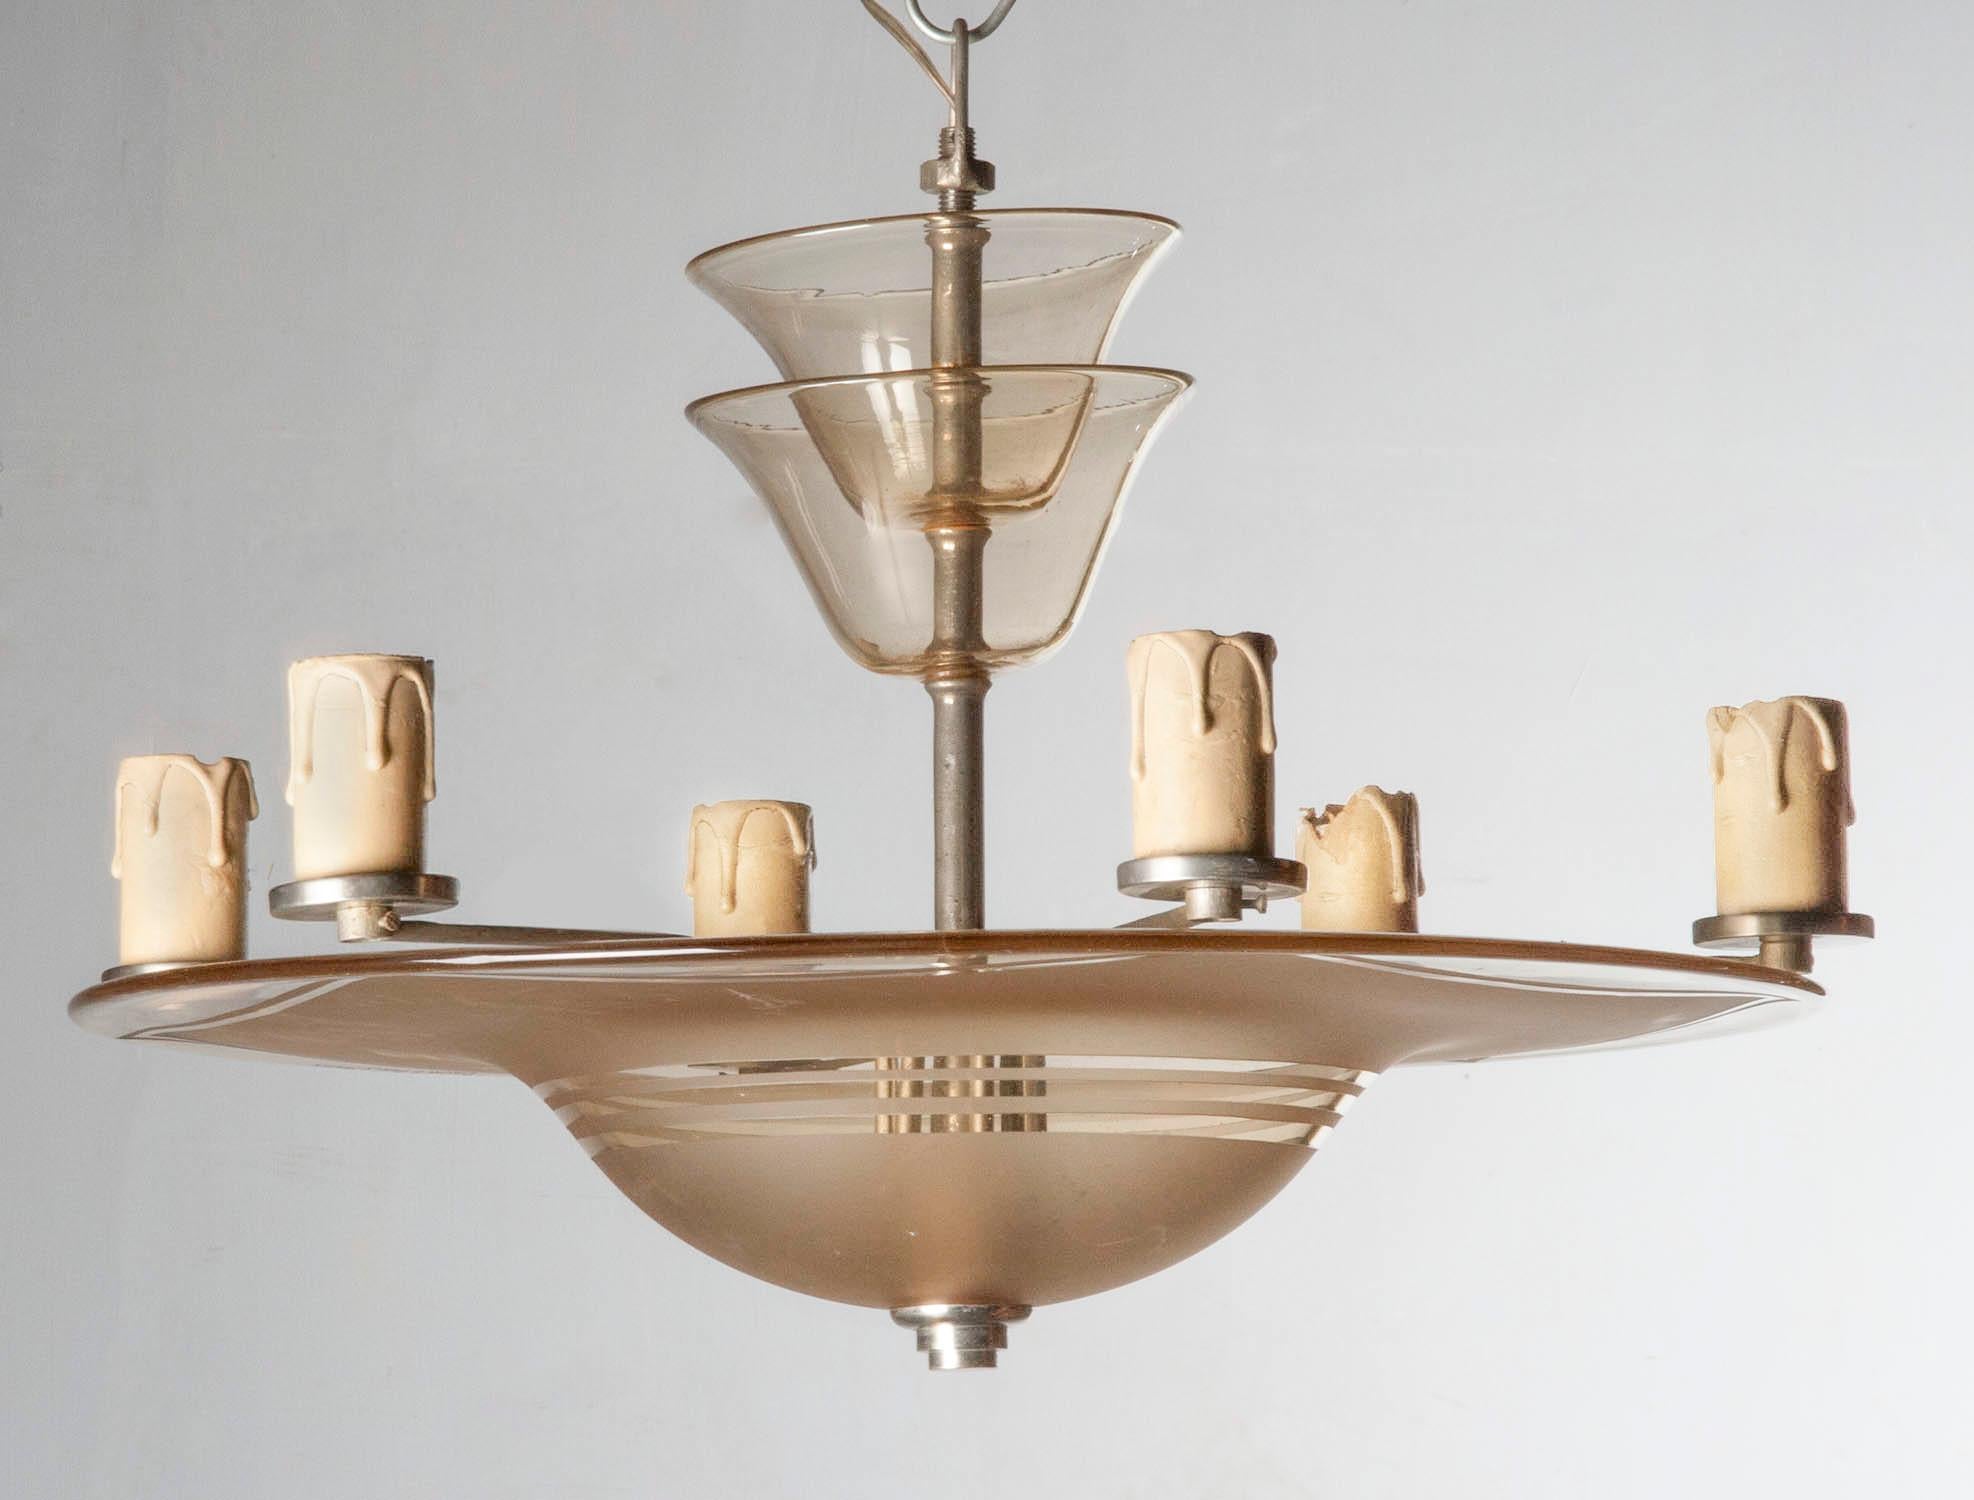 A French Art Deco ceiling lamp. Made in the end of the French Art Deco period, circa 1930-1940. It have a modernist appeal. The lamp have a frosted etched glass bowl. The base is an iron structure, on each end E17 fittings, with cardboard